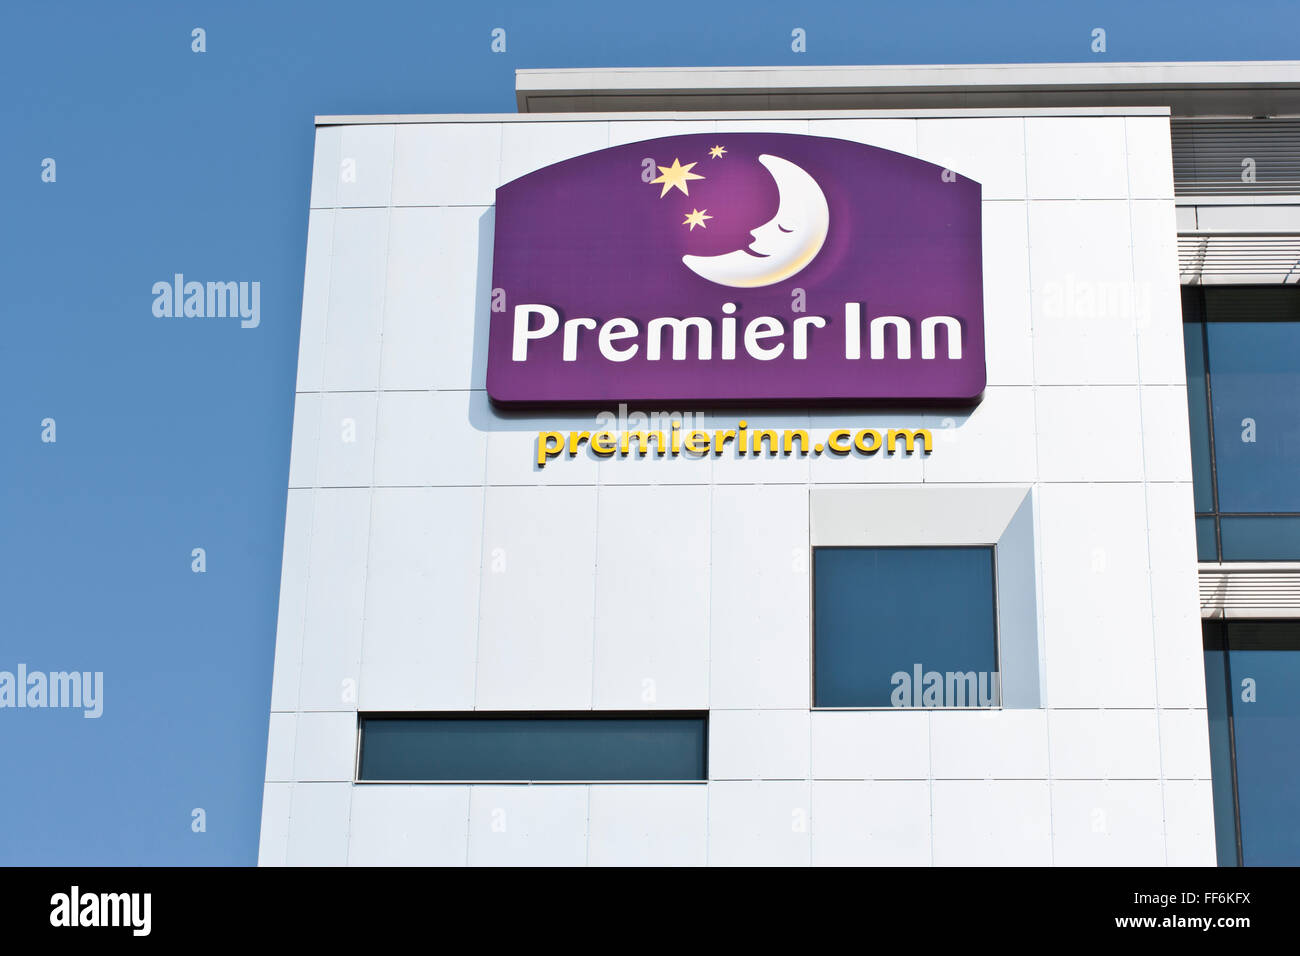 Premier Inn Hotel, Ealing, London designed by MAA Architects Stock Photo